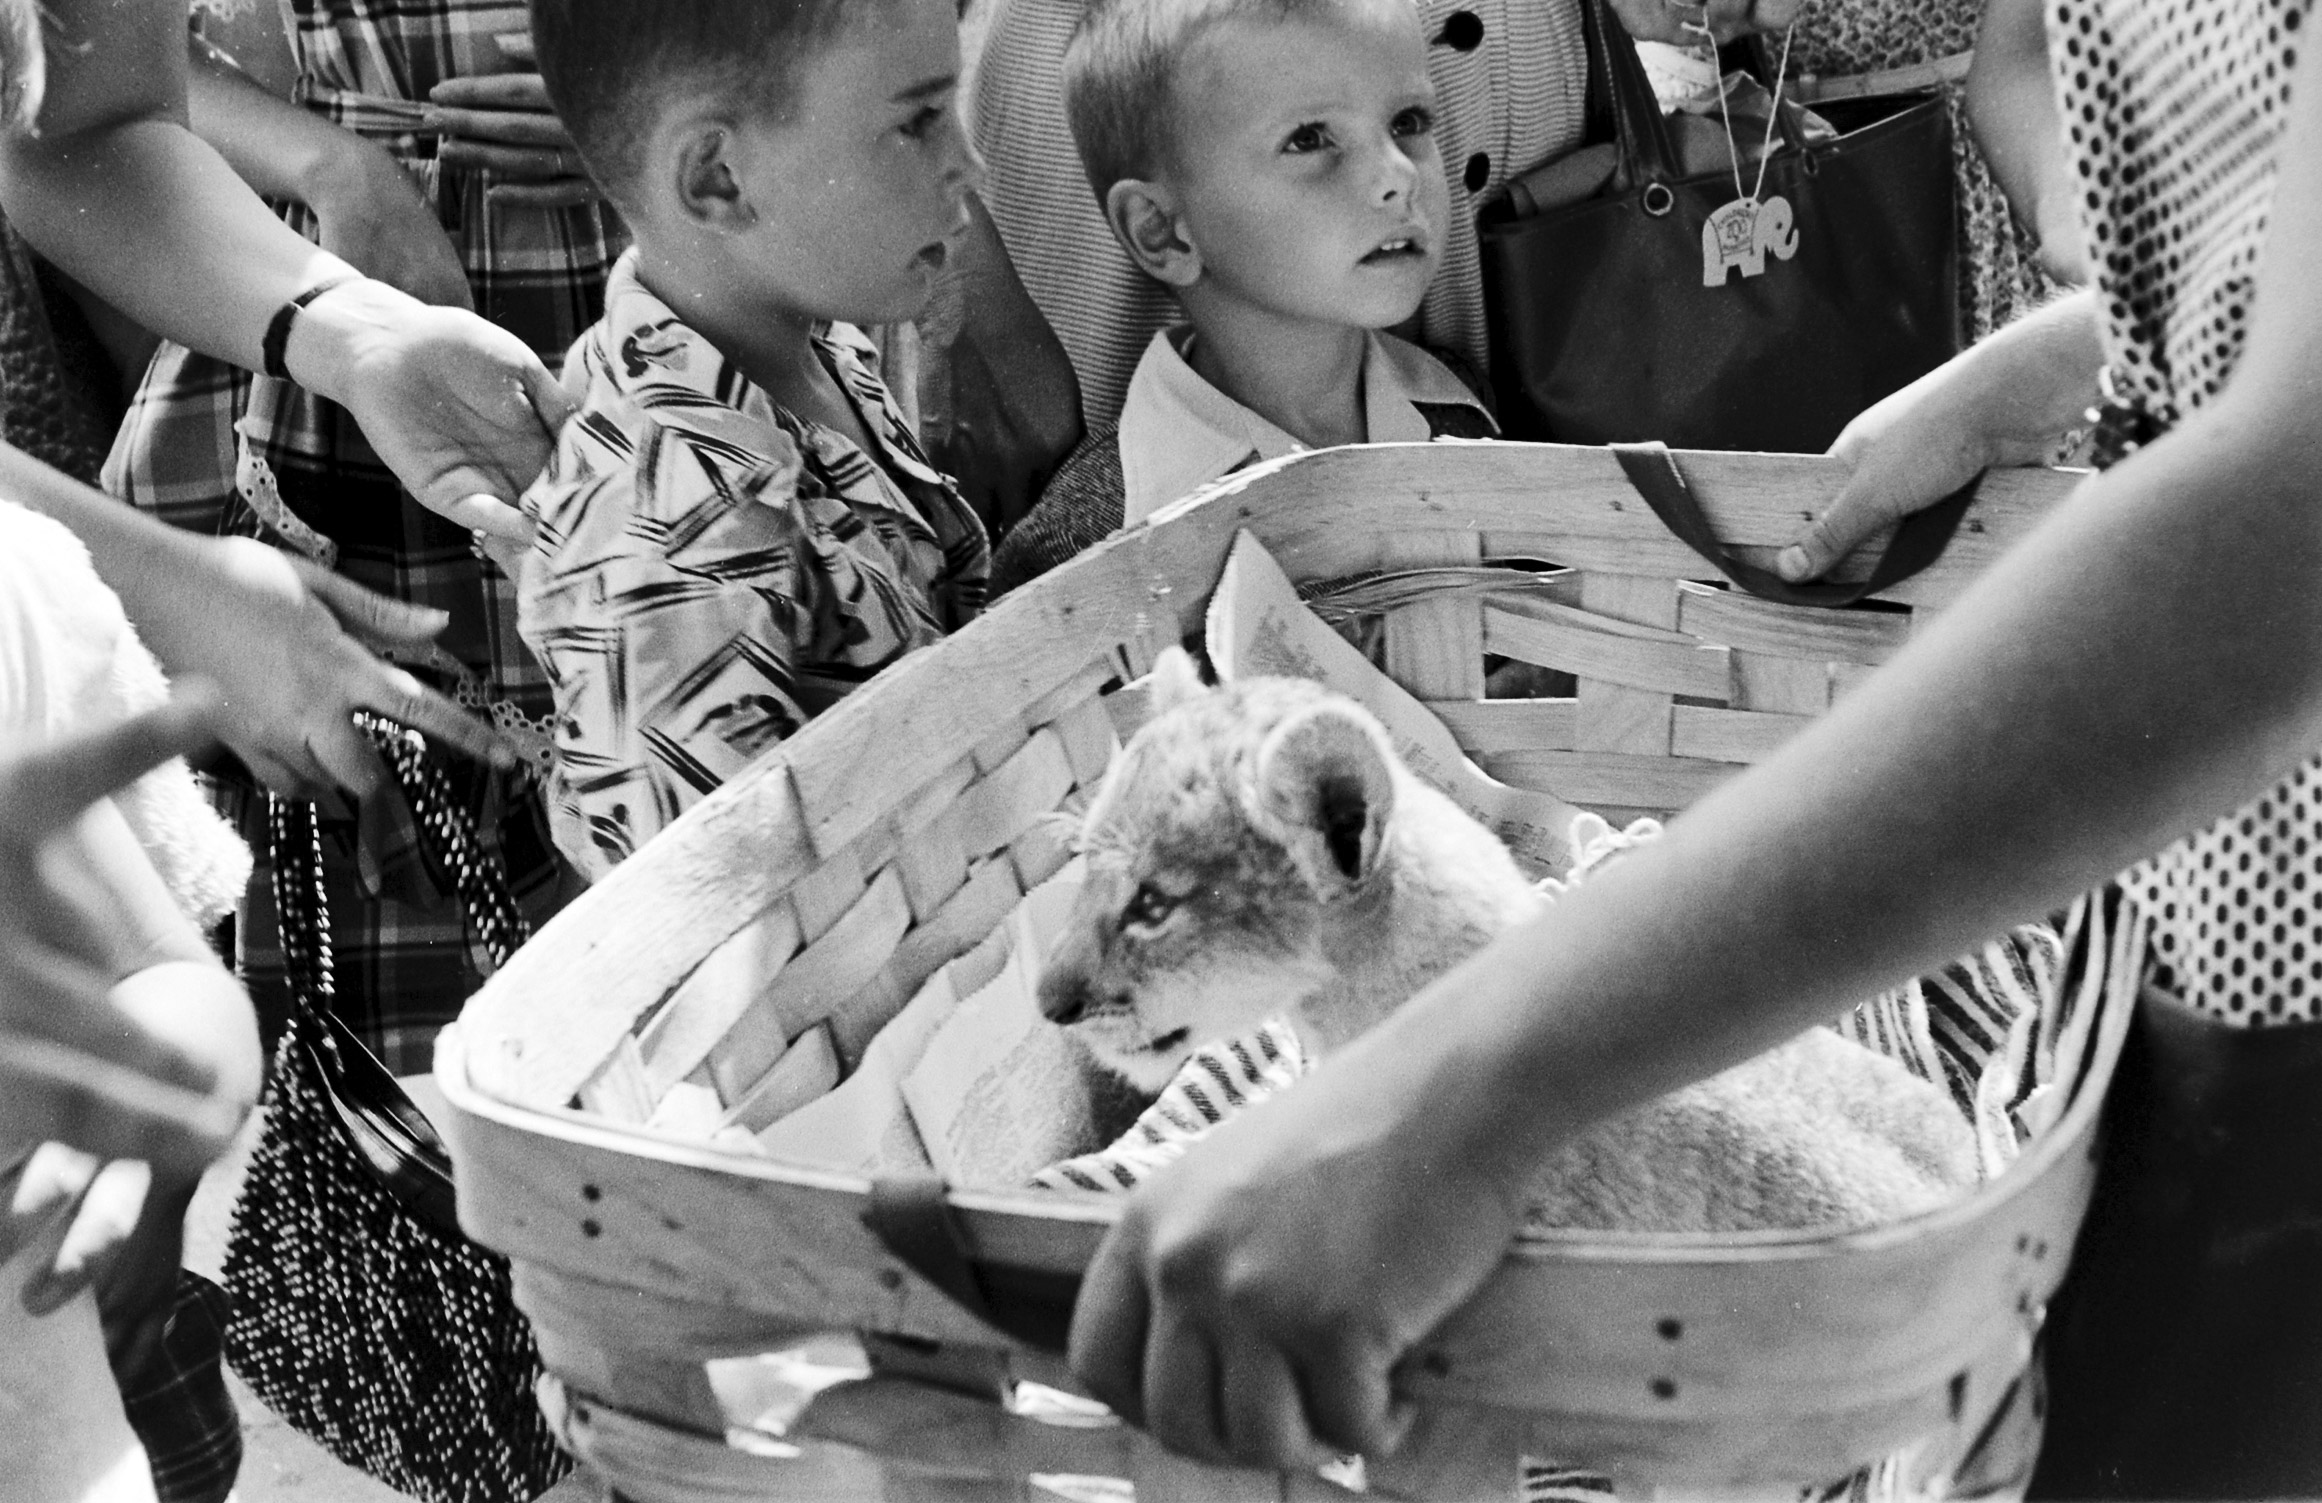 A lion cub in a basket at the Brookfield Children's Zoo in Chicago, 1953.